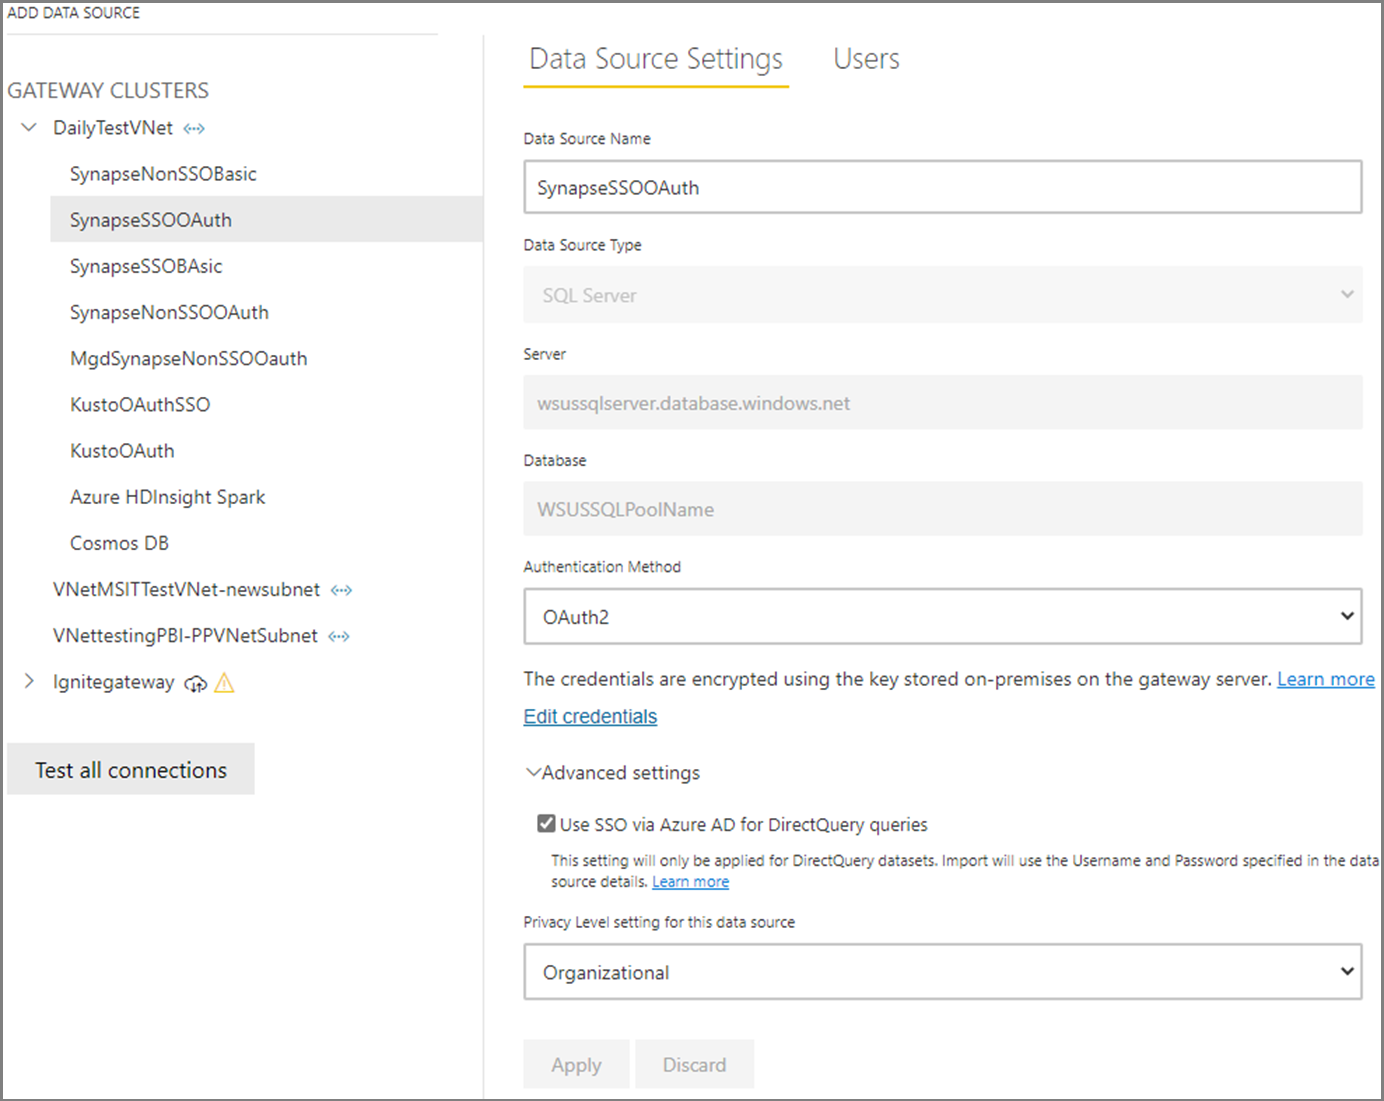 Screenshot of the Data Source Settings page with the data source settings filled out.